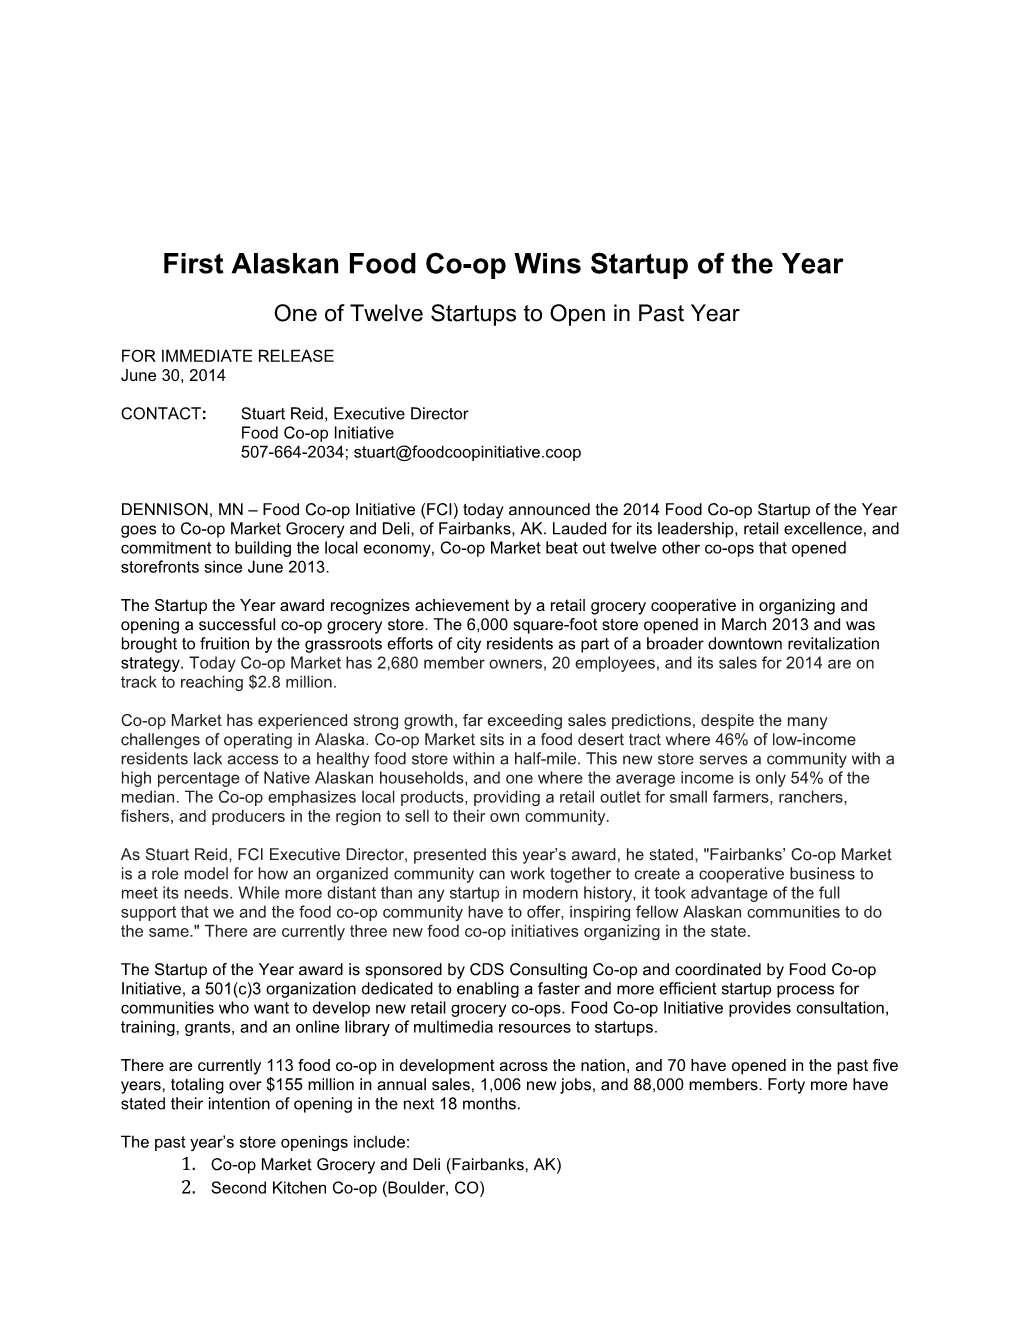 First Alaskan Food Co-Op Wins Startup of the Year